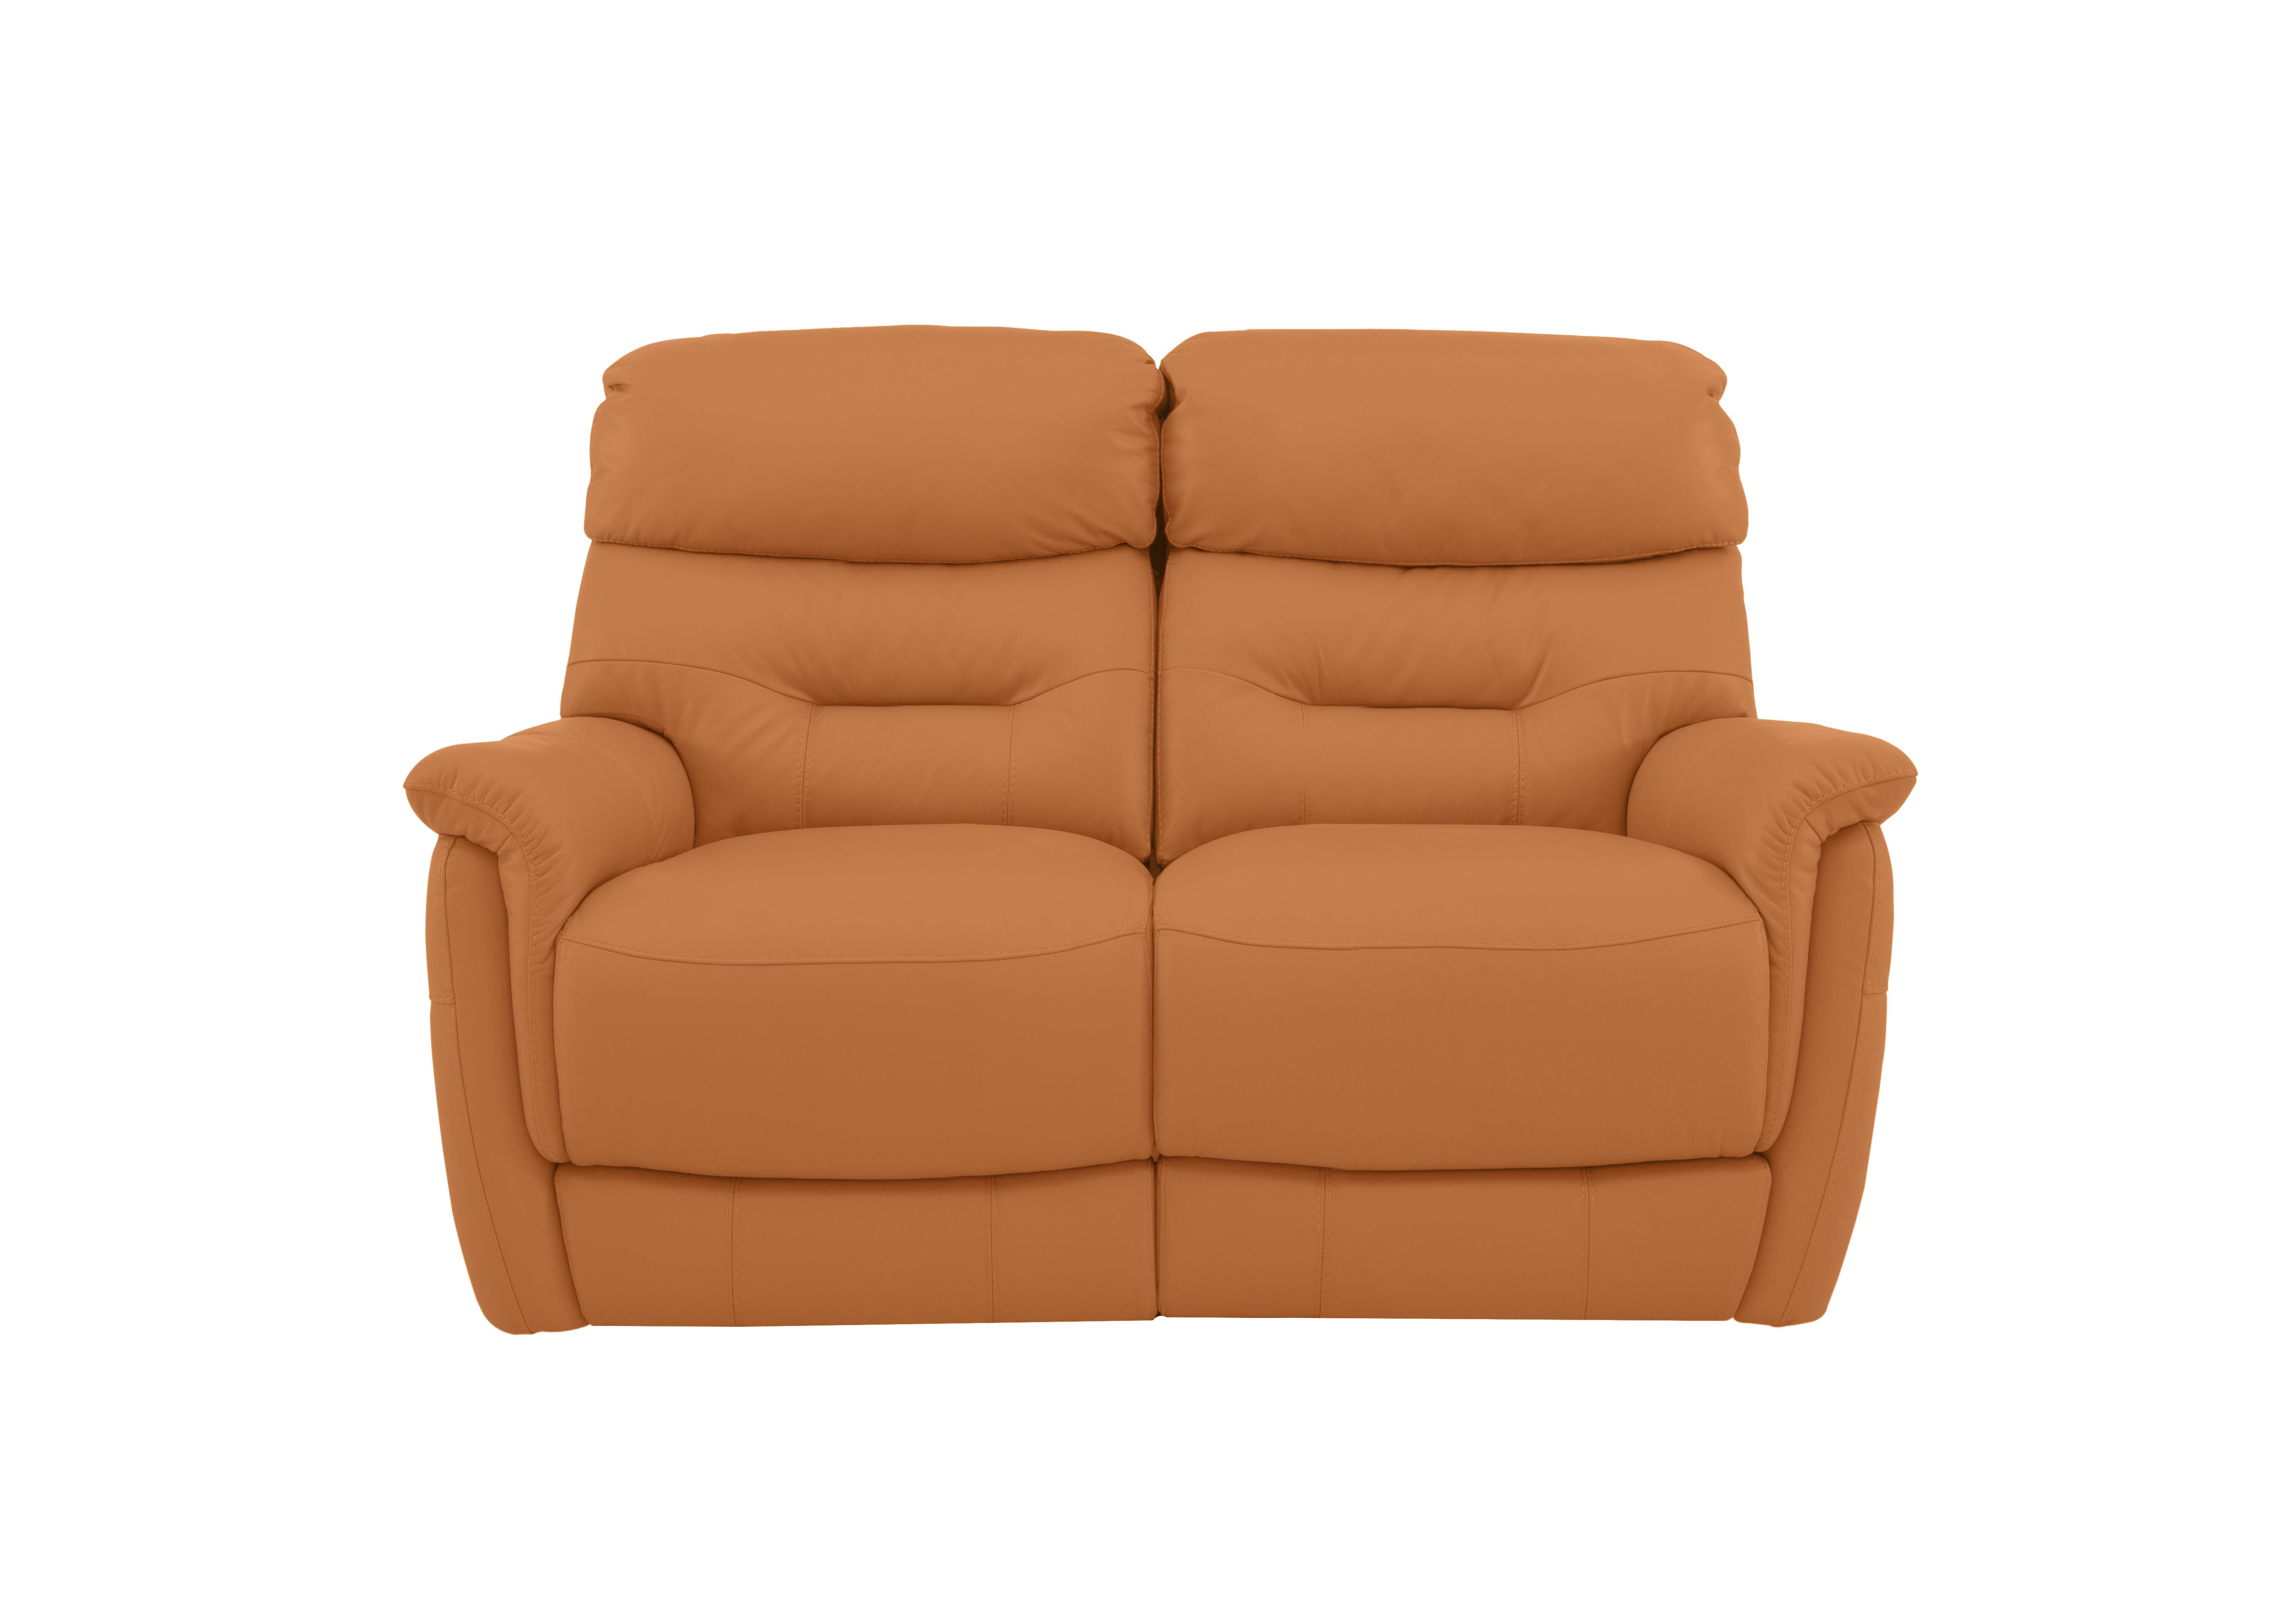 Chicago 2 Seater Leather Sofa in Bv-335e Honey Yellow on Furniture Village